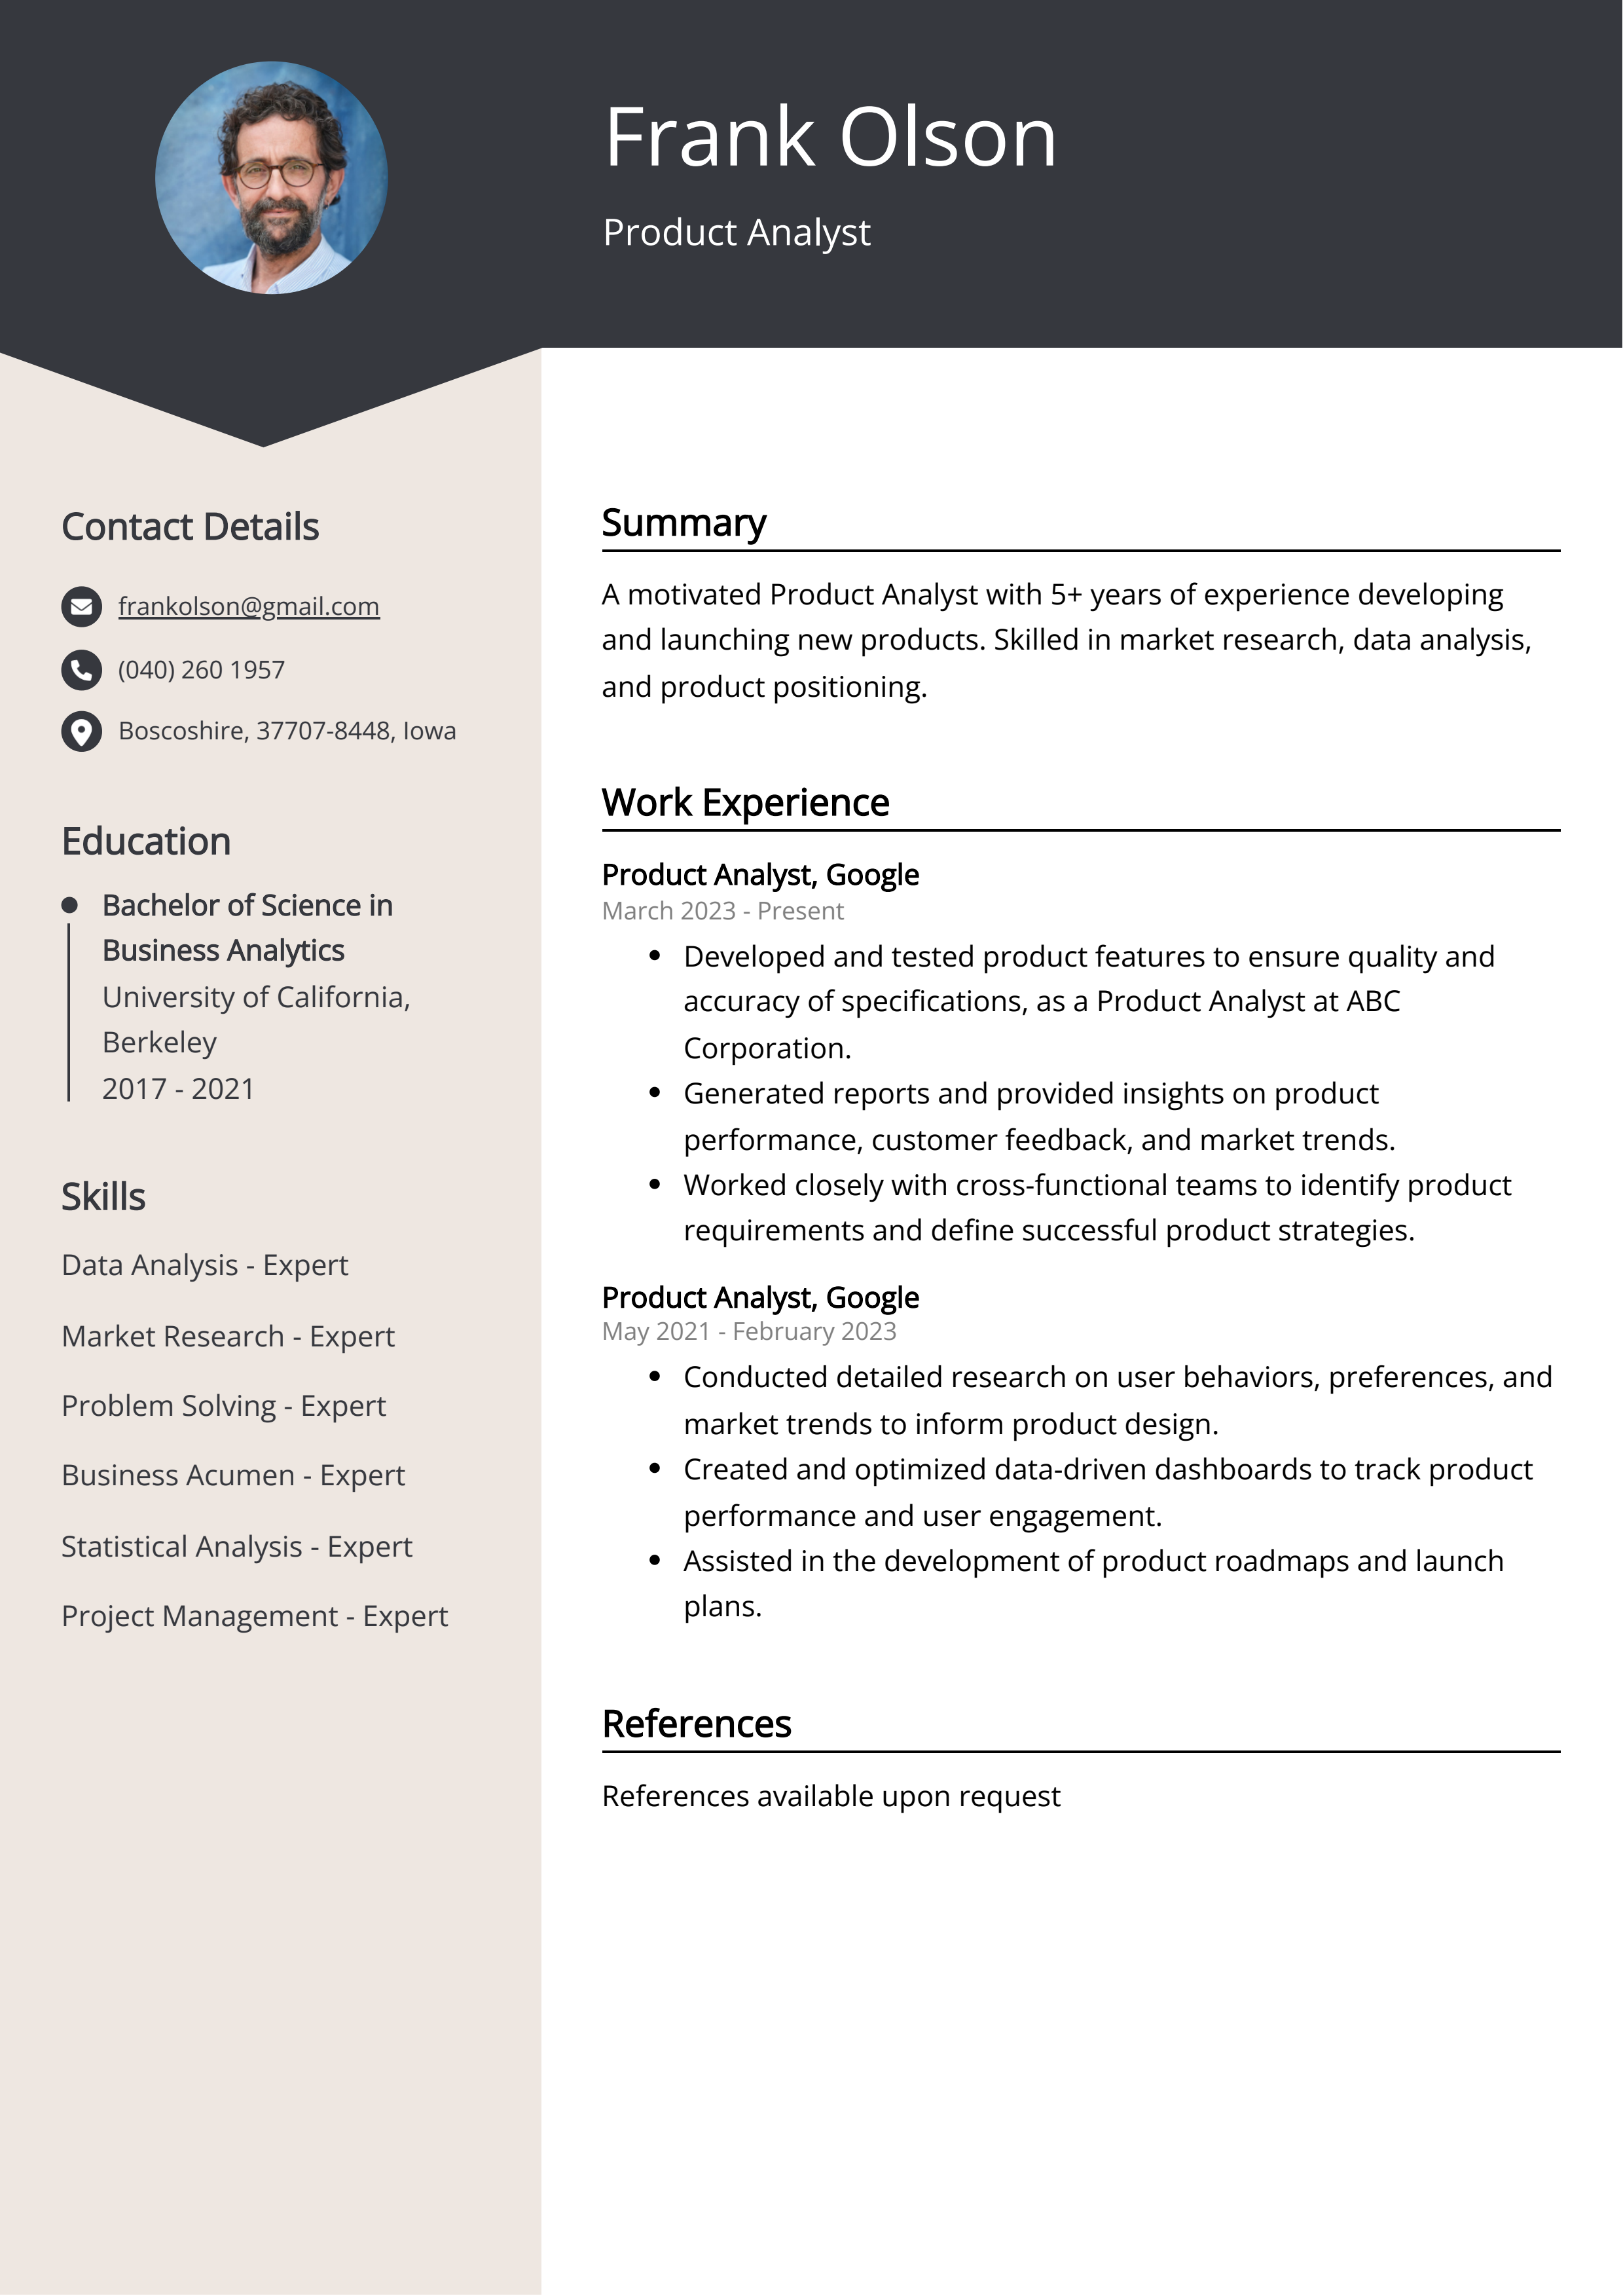 Product Analyst CV Example